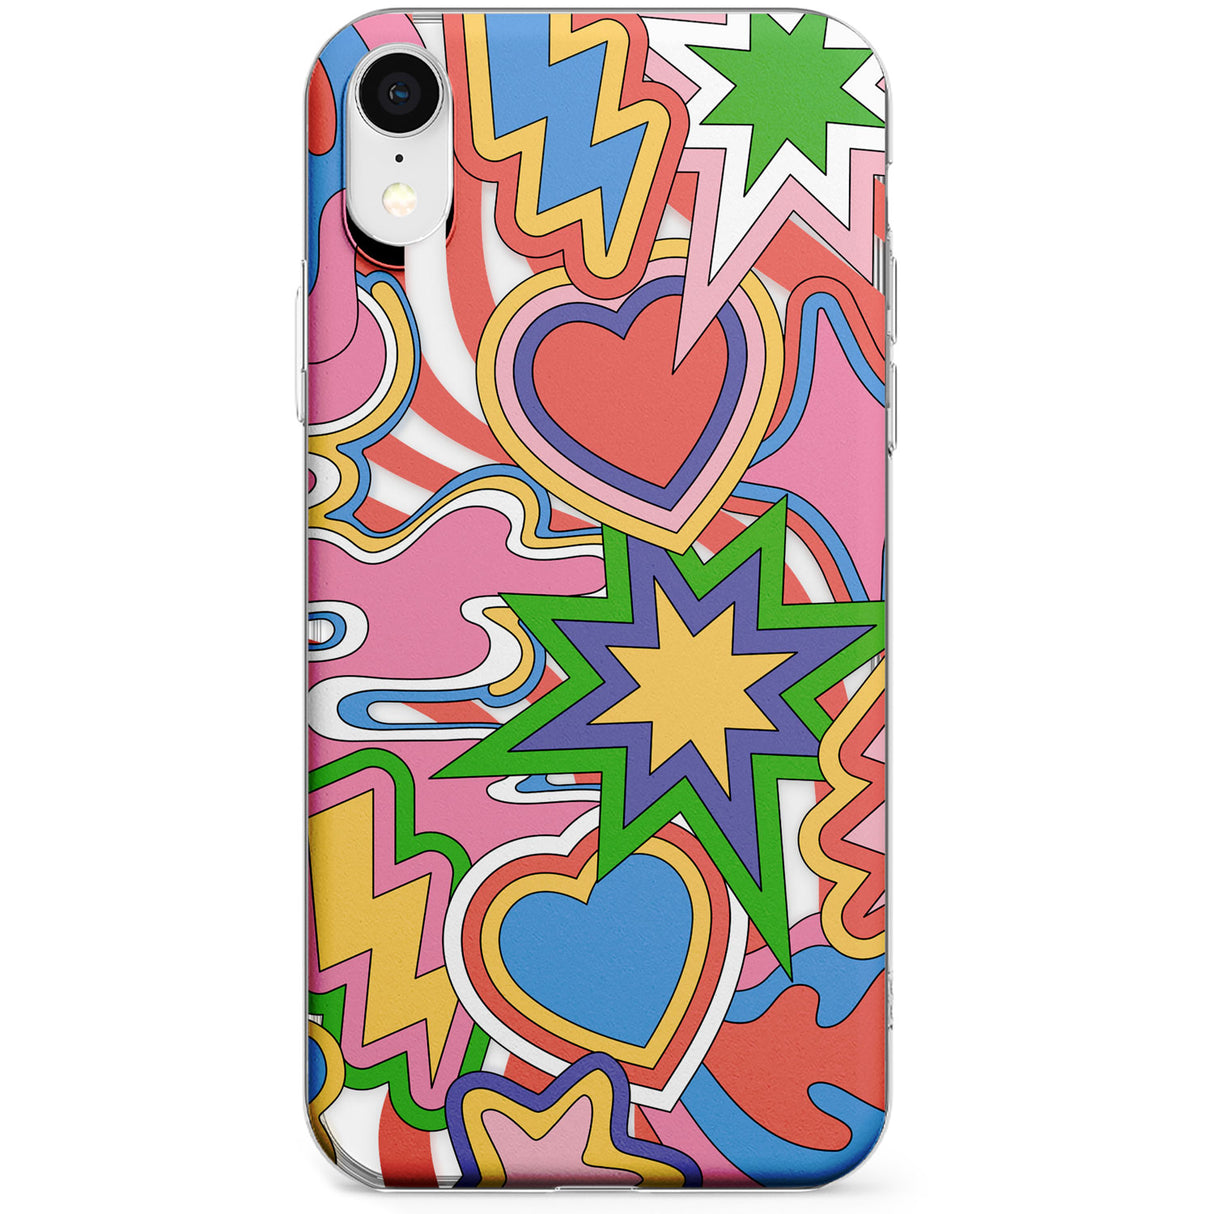 Psychedelic Pop Art Explosion Phone Case for iPhone X, XS Max, XR